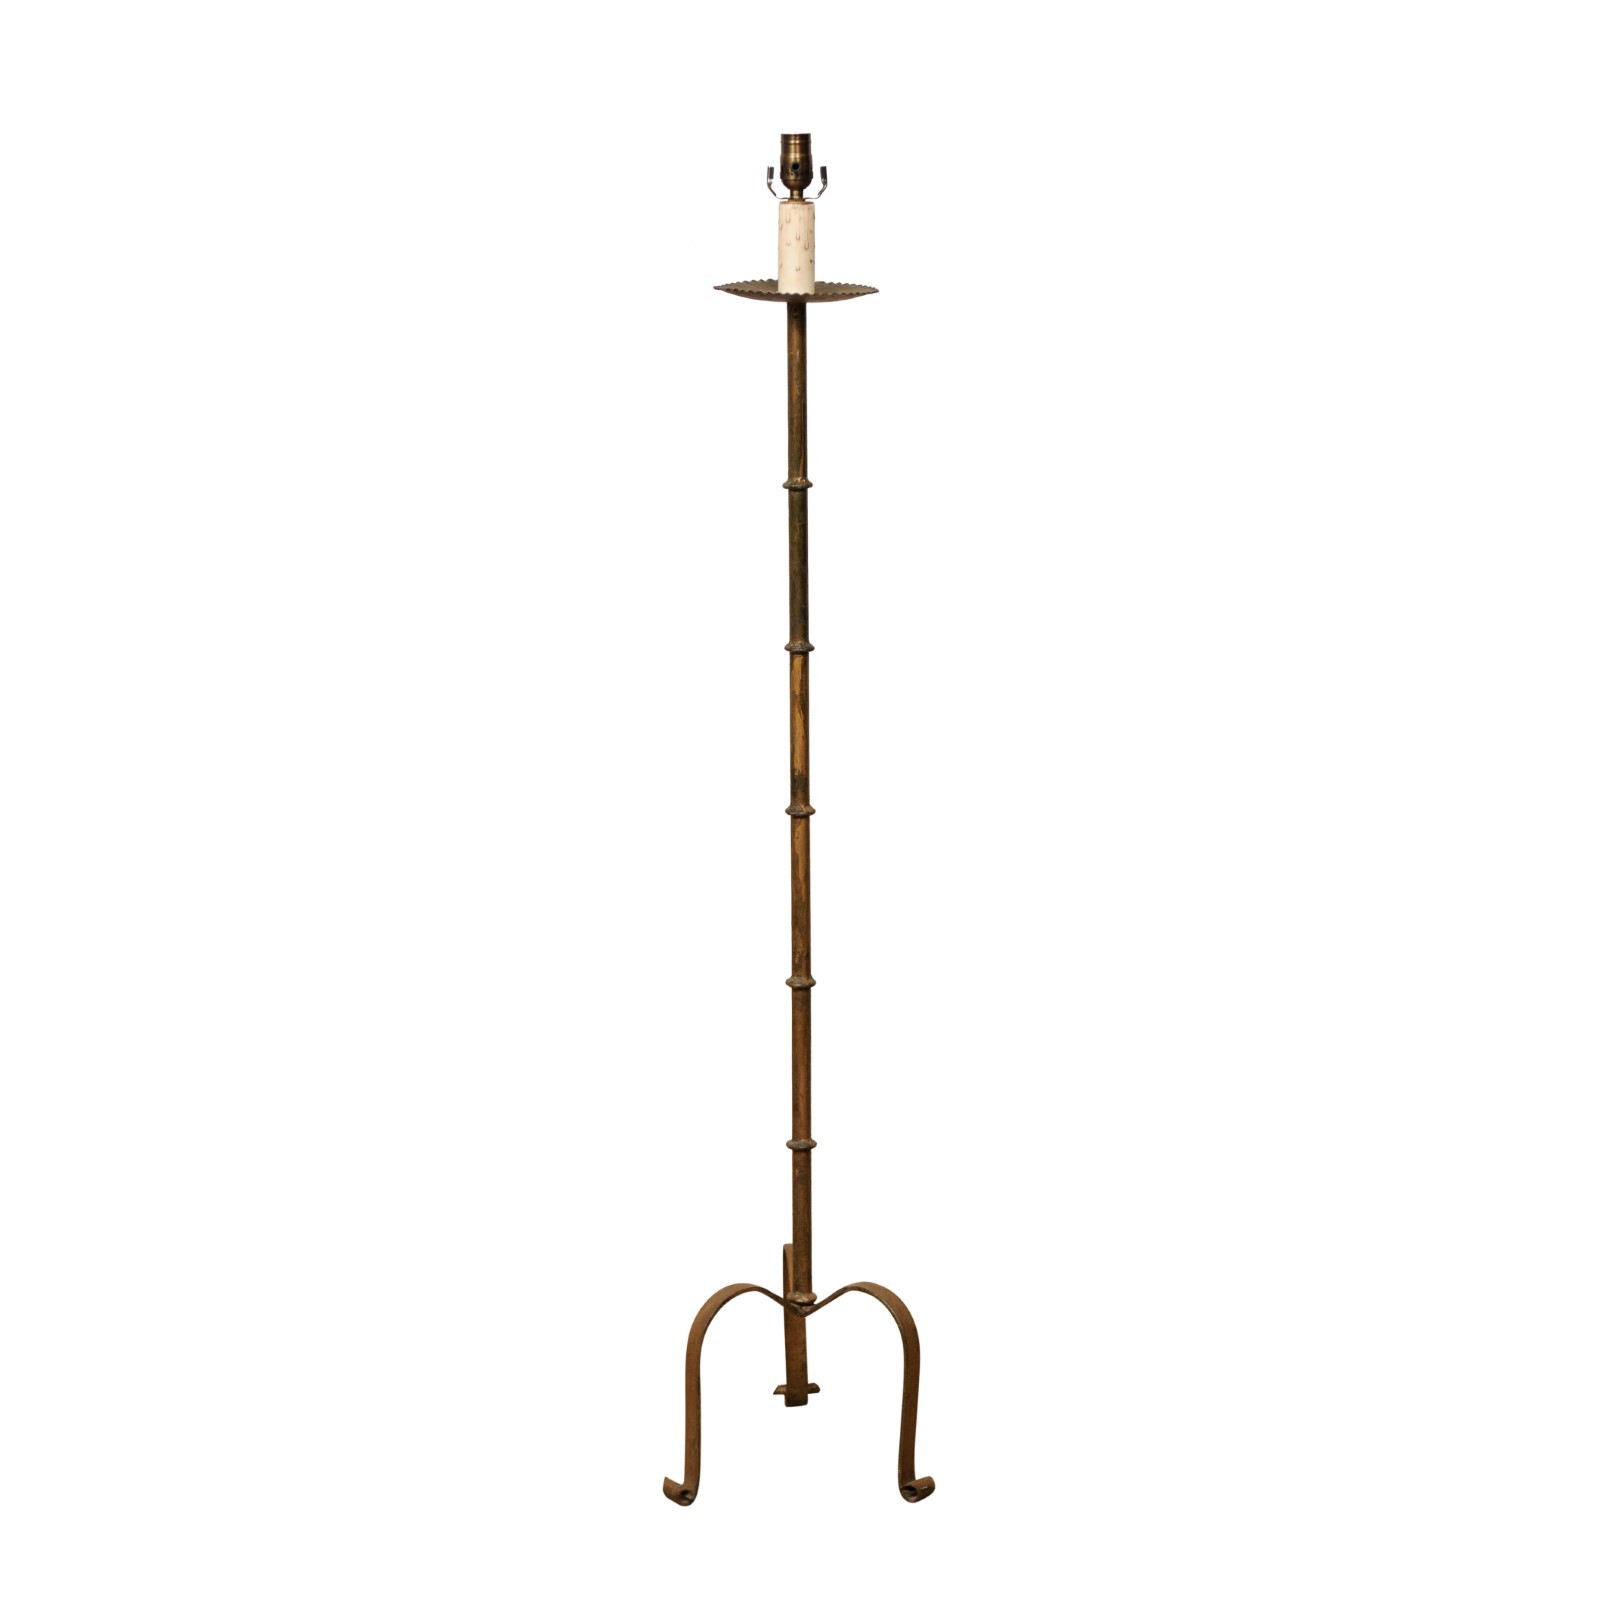 Vintage French Metal Floor Lamp, Gold Tone